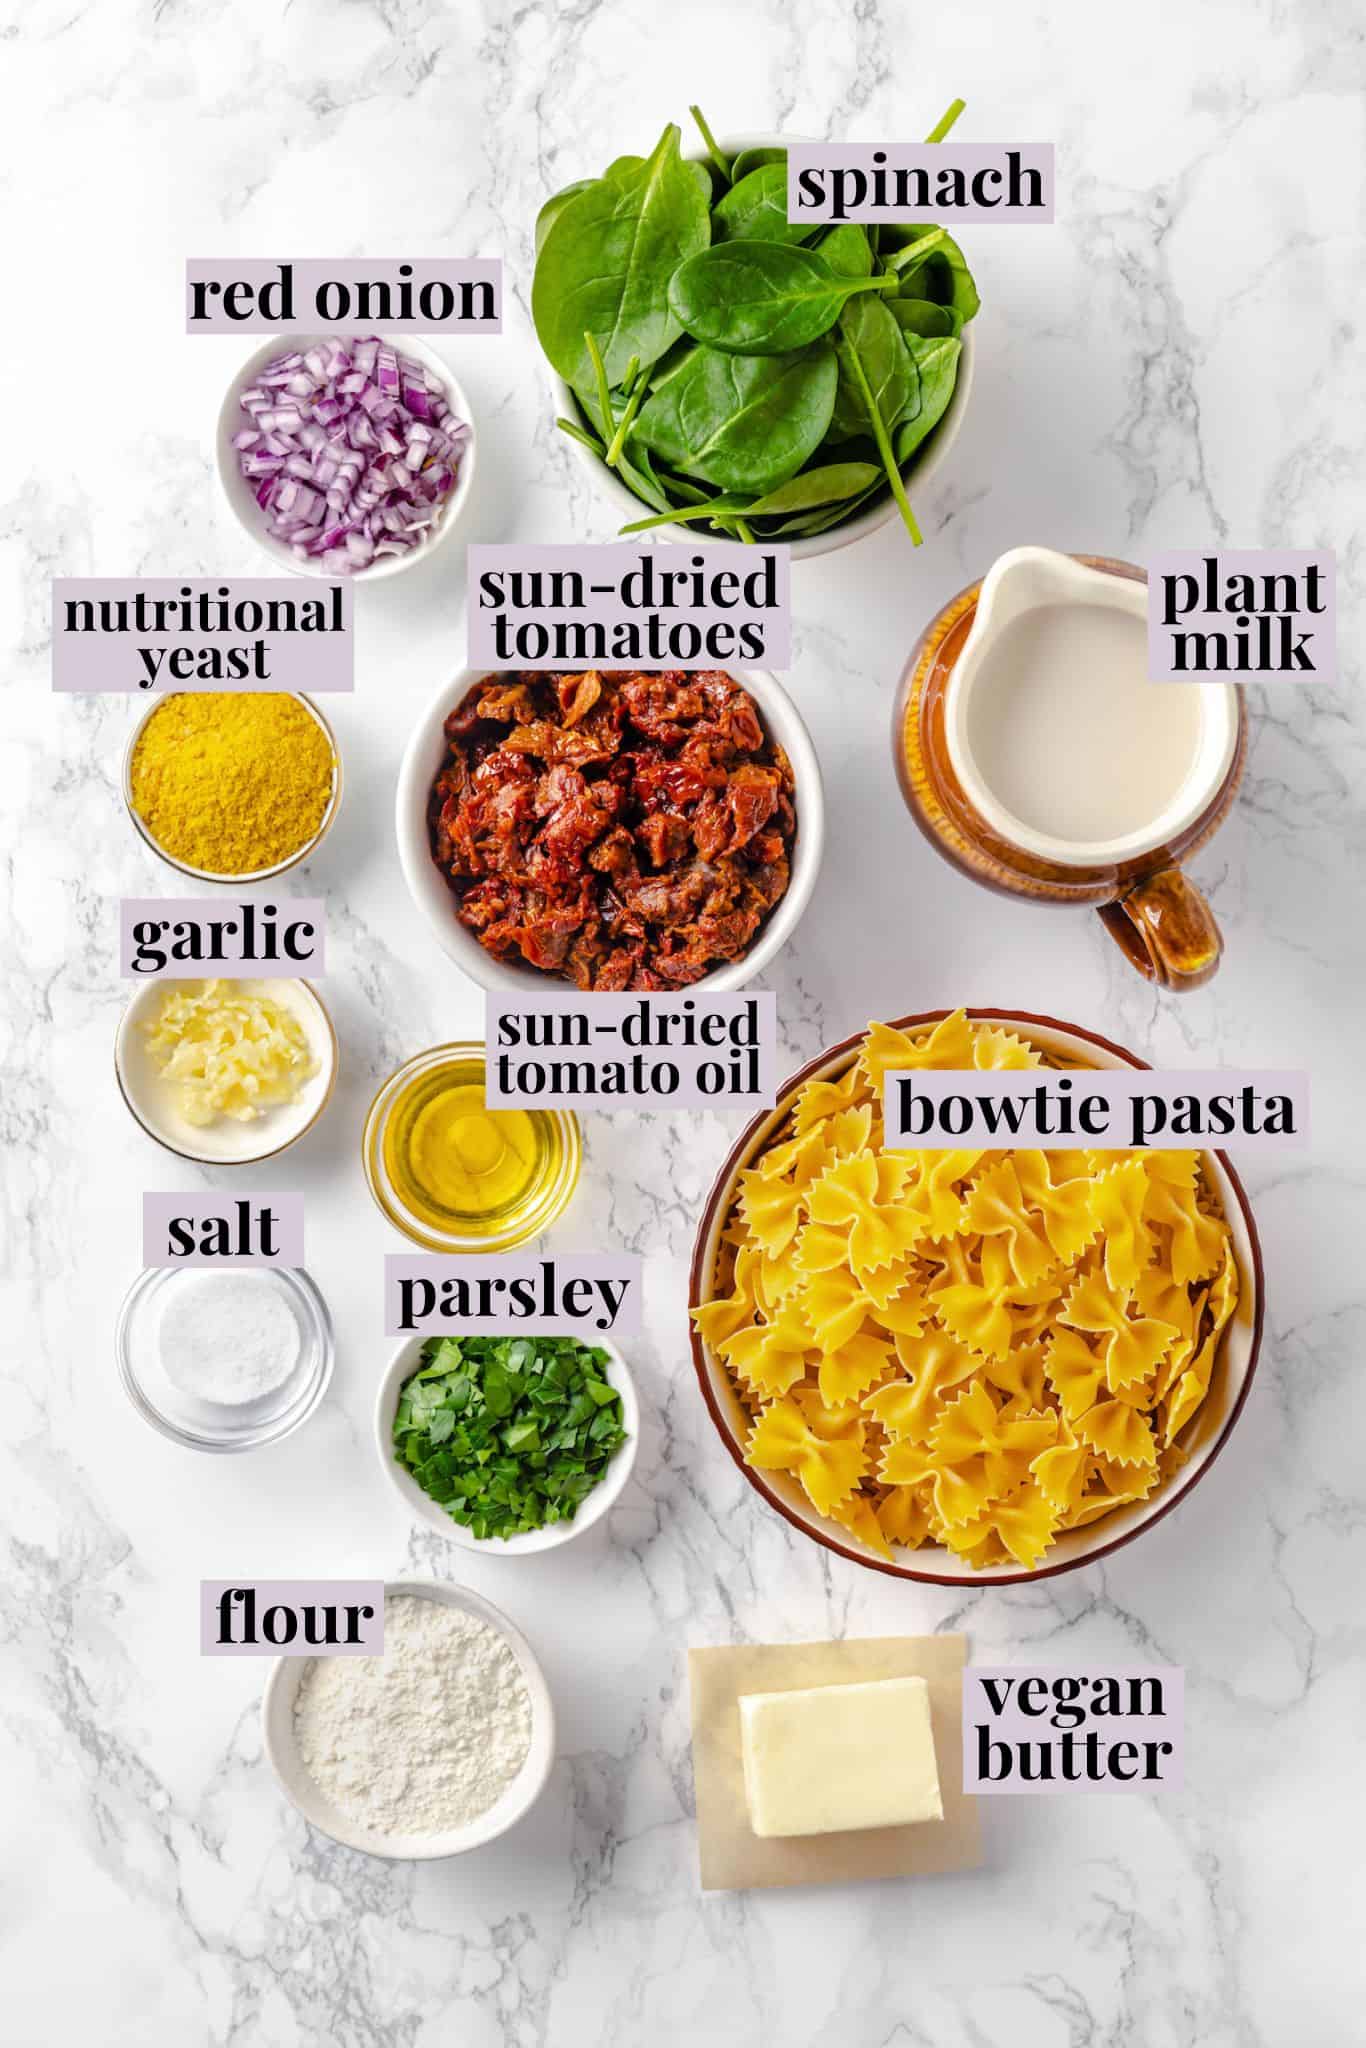 Overhead view of ingredients for sun-dried tomato pasta with labels